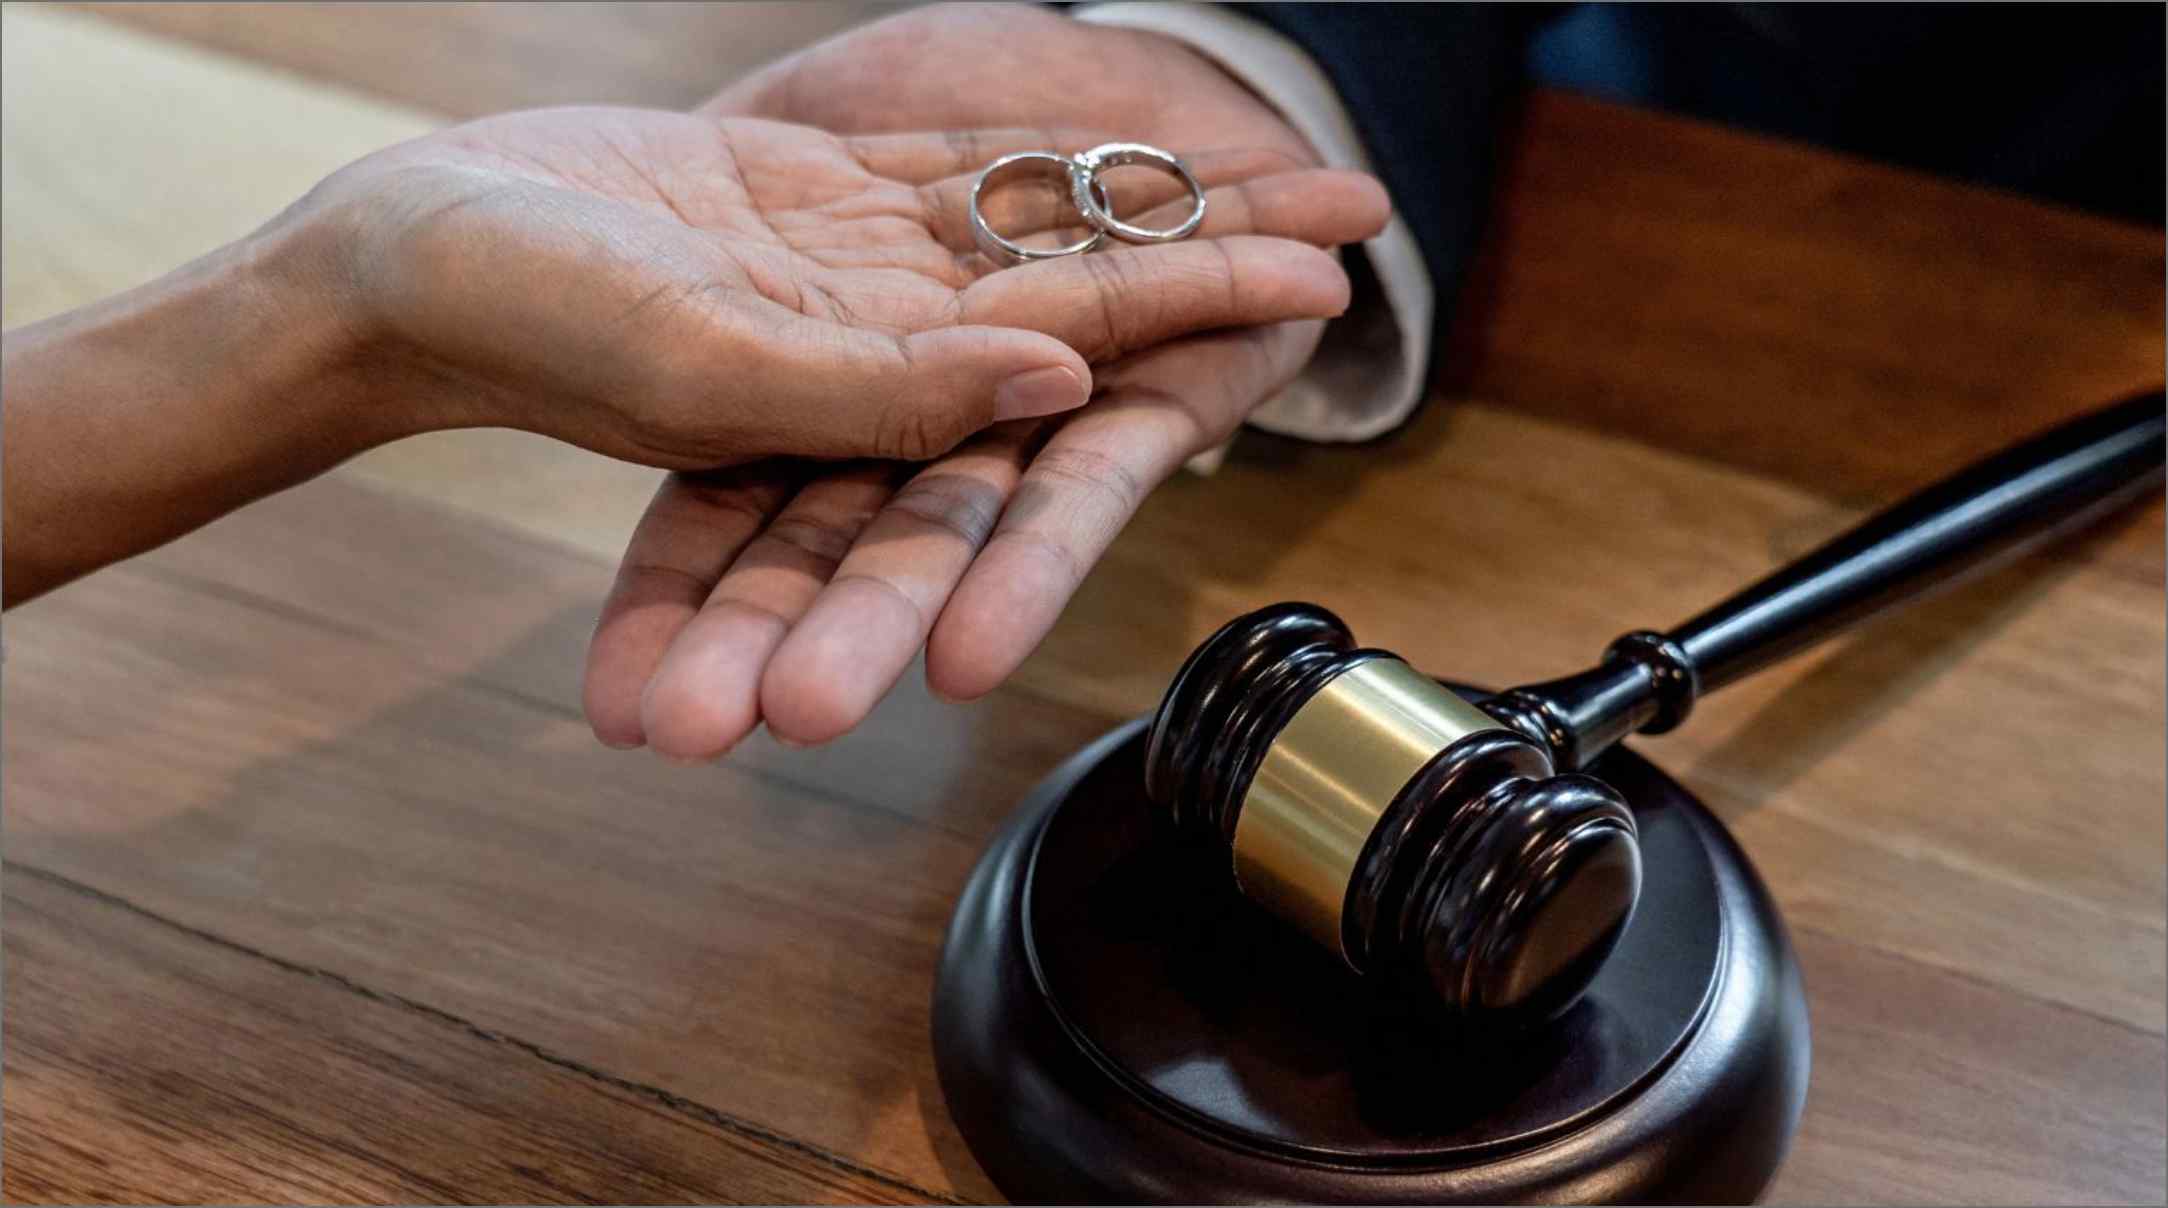 A person handing over wedding rings to a divorce lawyer with a black gavel on a wooden table